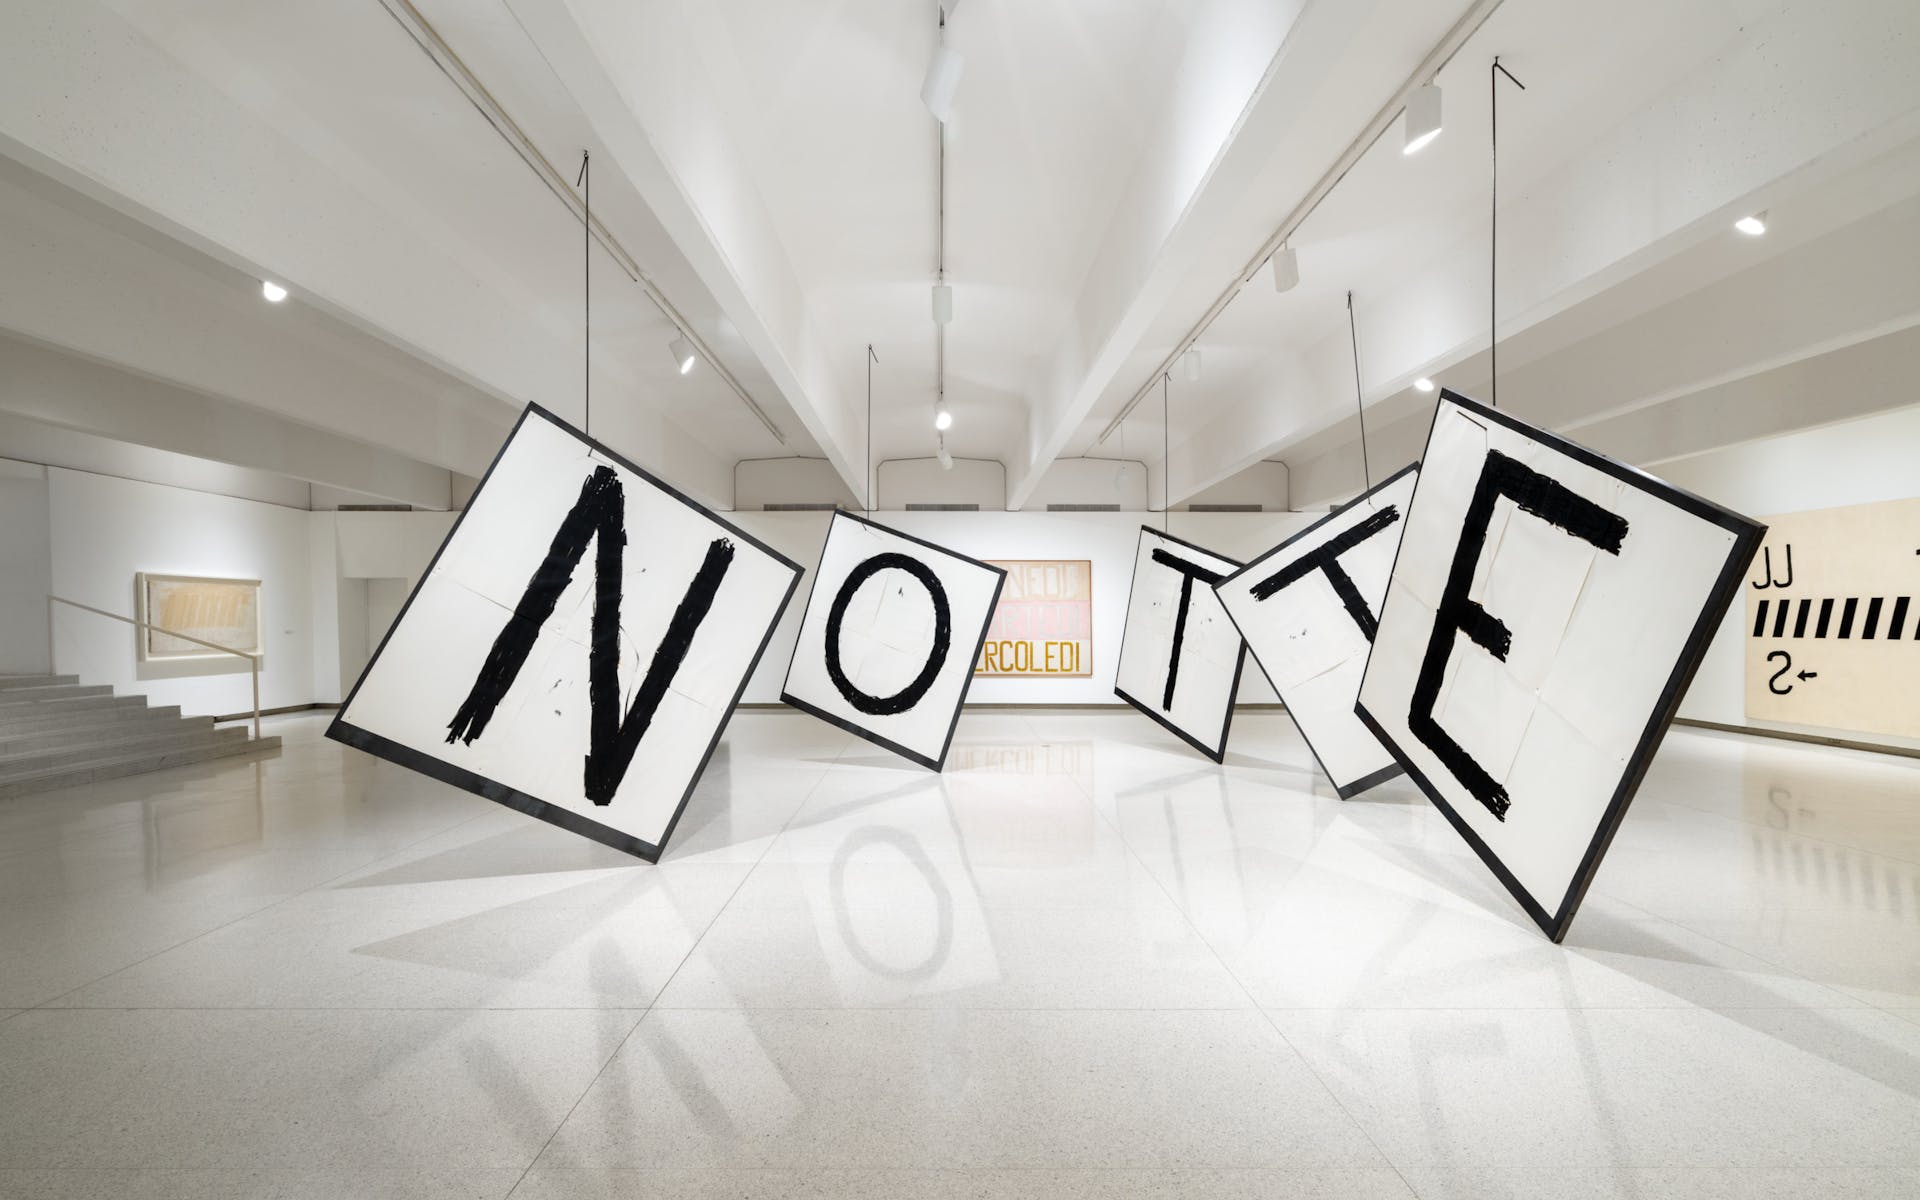 A series of paintings of single letters are hung by large metal hooks in a gallery.